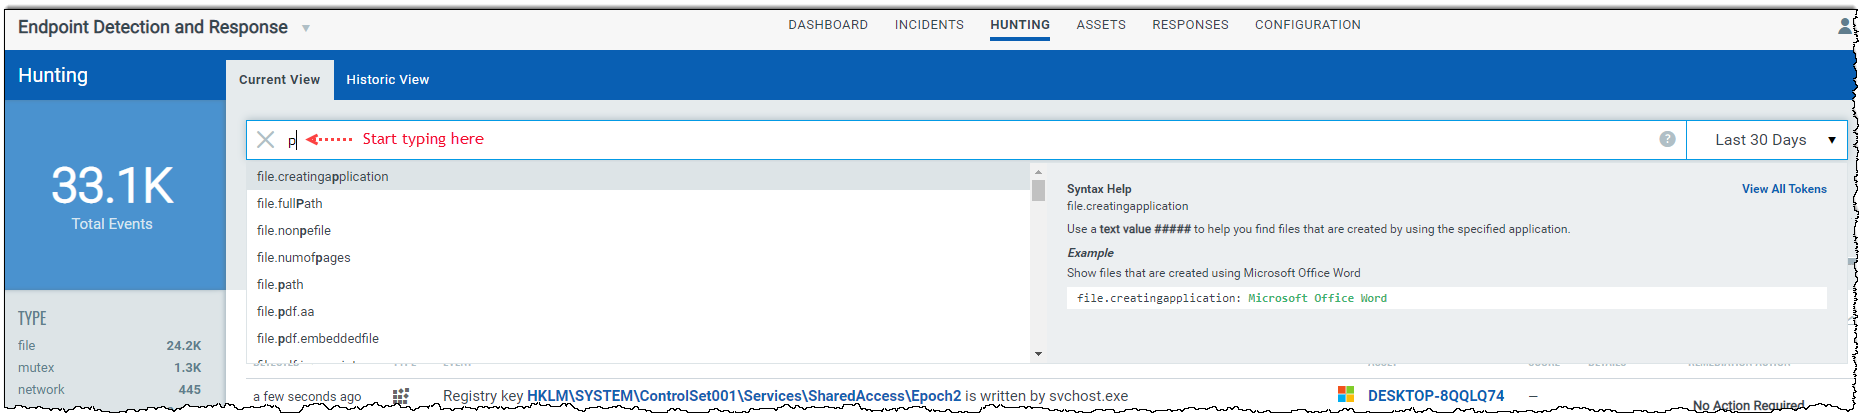 Asset properties listed for a sample asset search query on the Hunting tab.